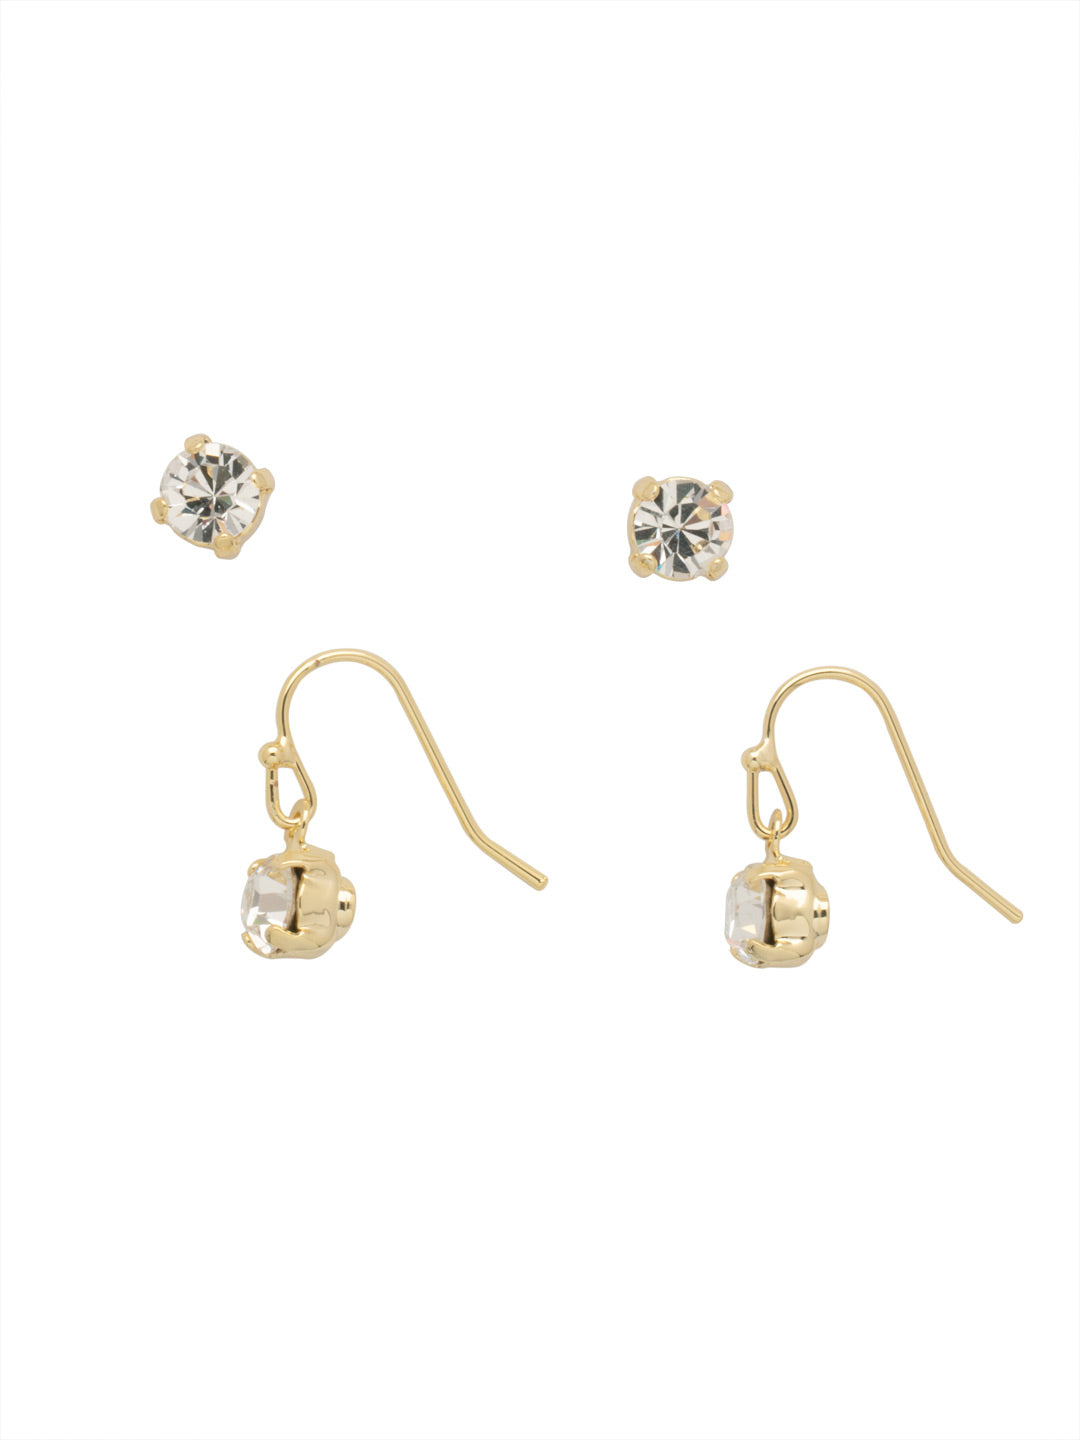 Jayda Set Dangle Earrings - EFM4BGCRY - <p>The Jayda Set Dangle Earrings include a pair of round-cut crystal studs and round-cut crystal dangle earrings, both dainty enough to wear together on the ear. From Sorrelli's Crystal collection in our Bright Gold-tone finish.</p>